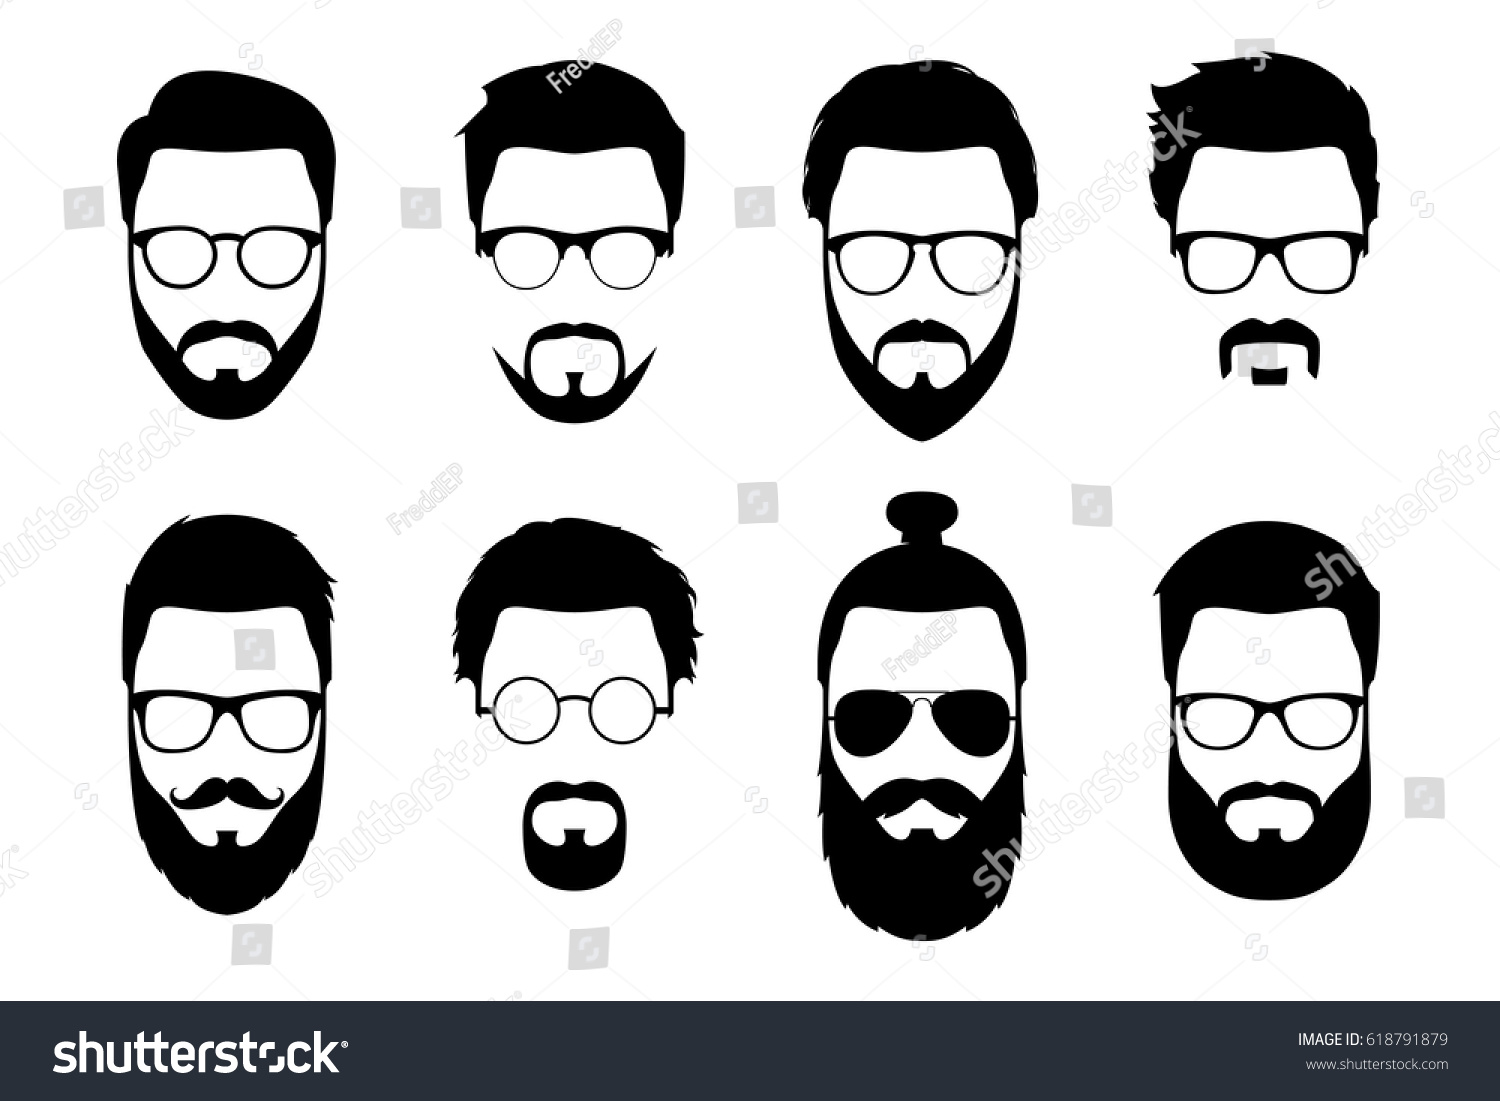 Hipster detailed hair and beards with sunglasses set. Fashion bearded man faces. Long beard with facial hair. Beard isolated on white background. Hipsters with different haircuts, mustaches, beards. #618791879